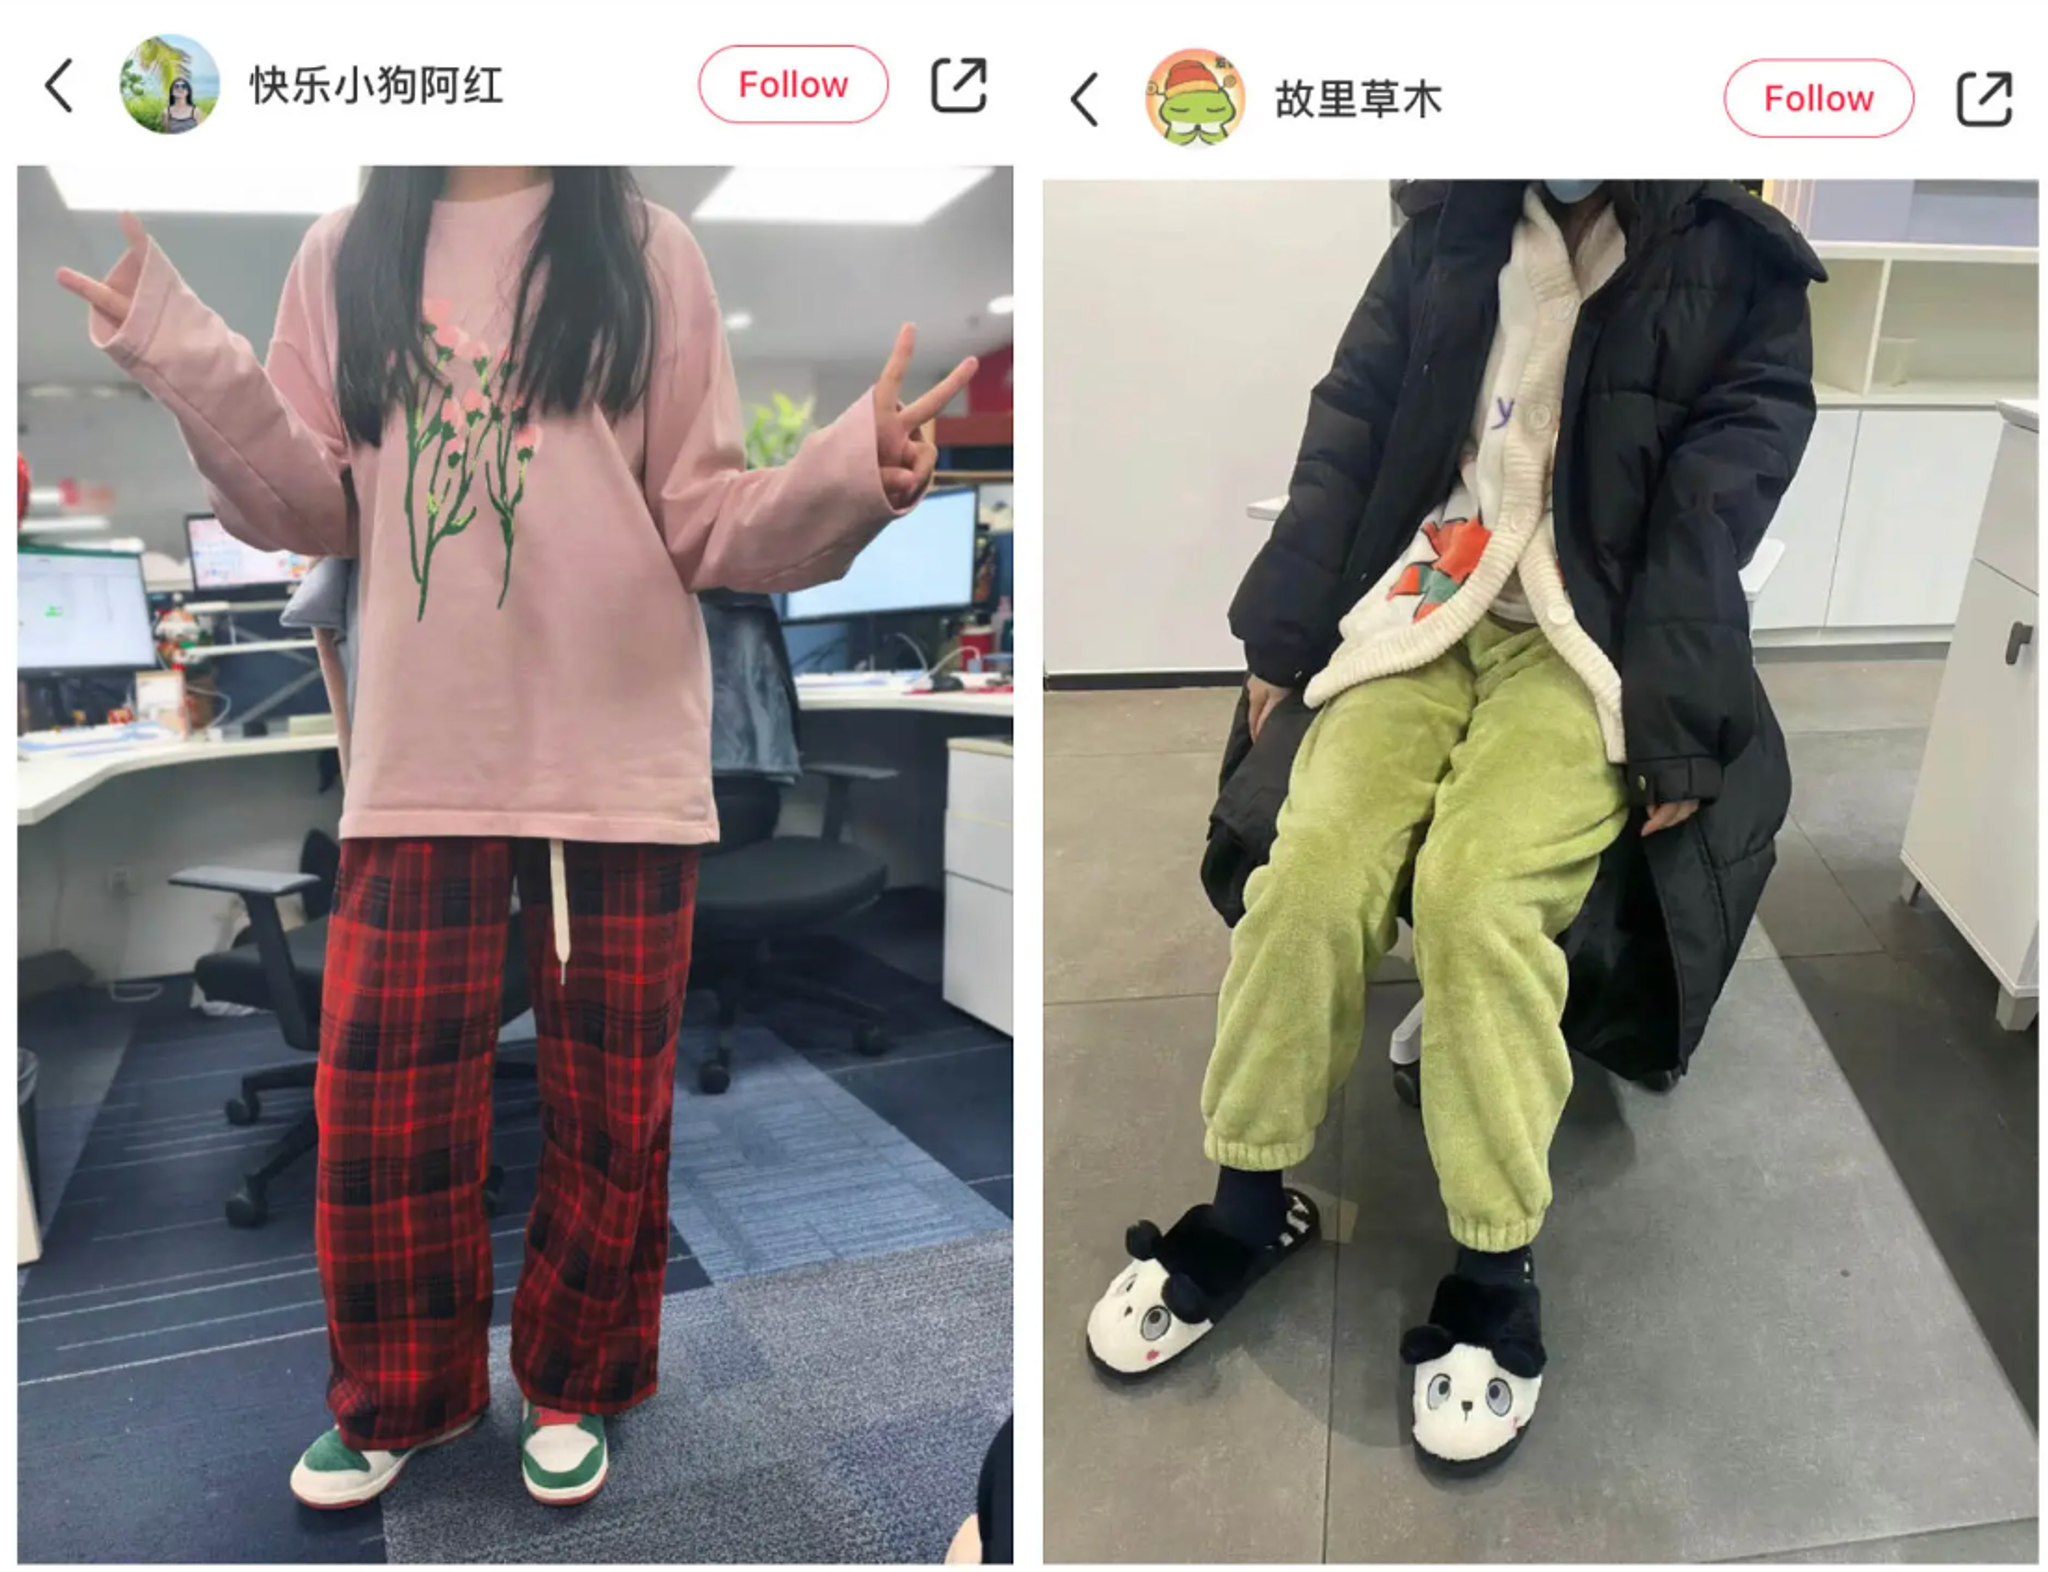 Young Chinese workers push back with 'gross' outfits